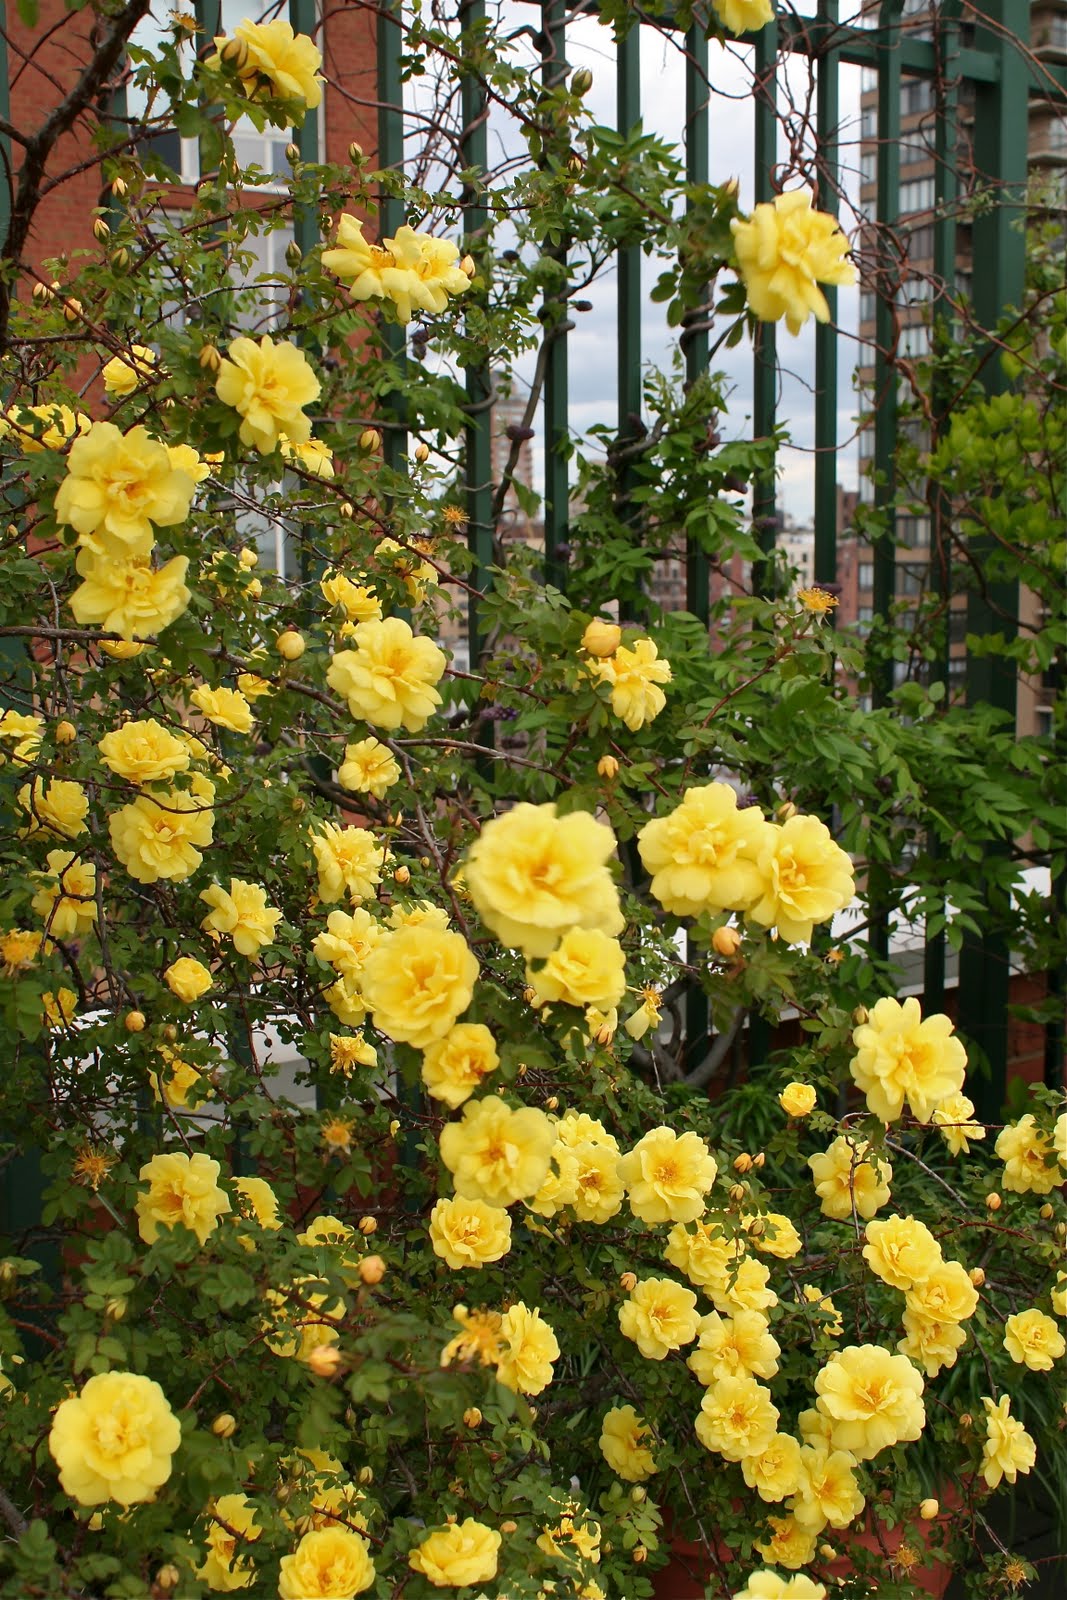 Garden Bytes from the Big Apple: FORSYTHIA KNOWS:PRUNE THE ROSE